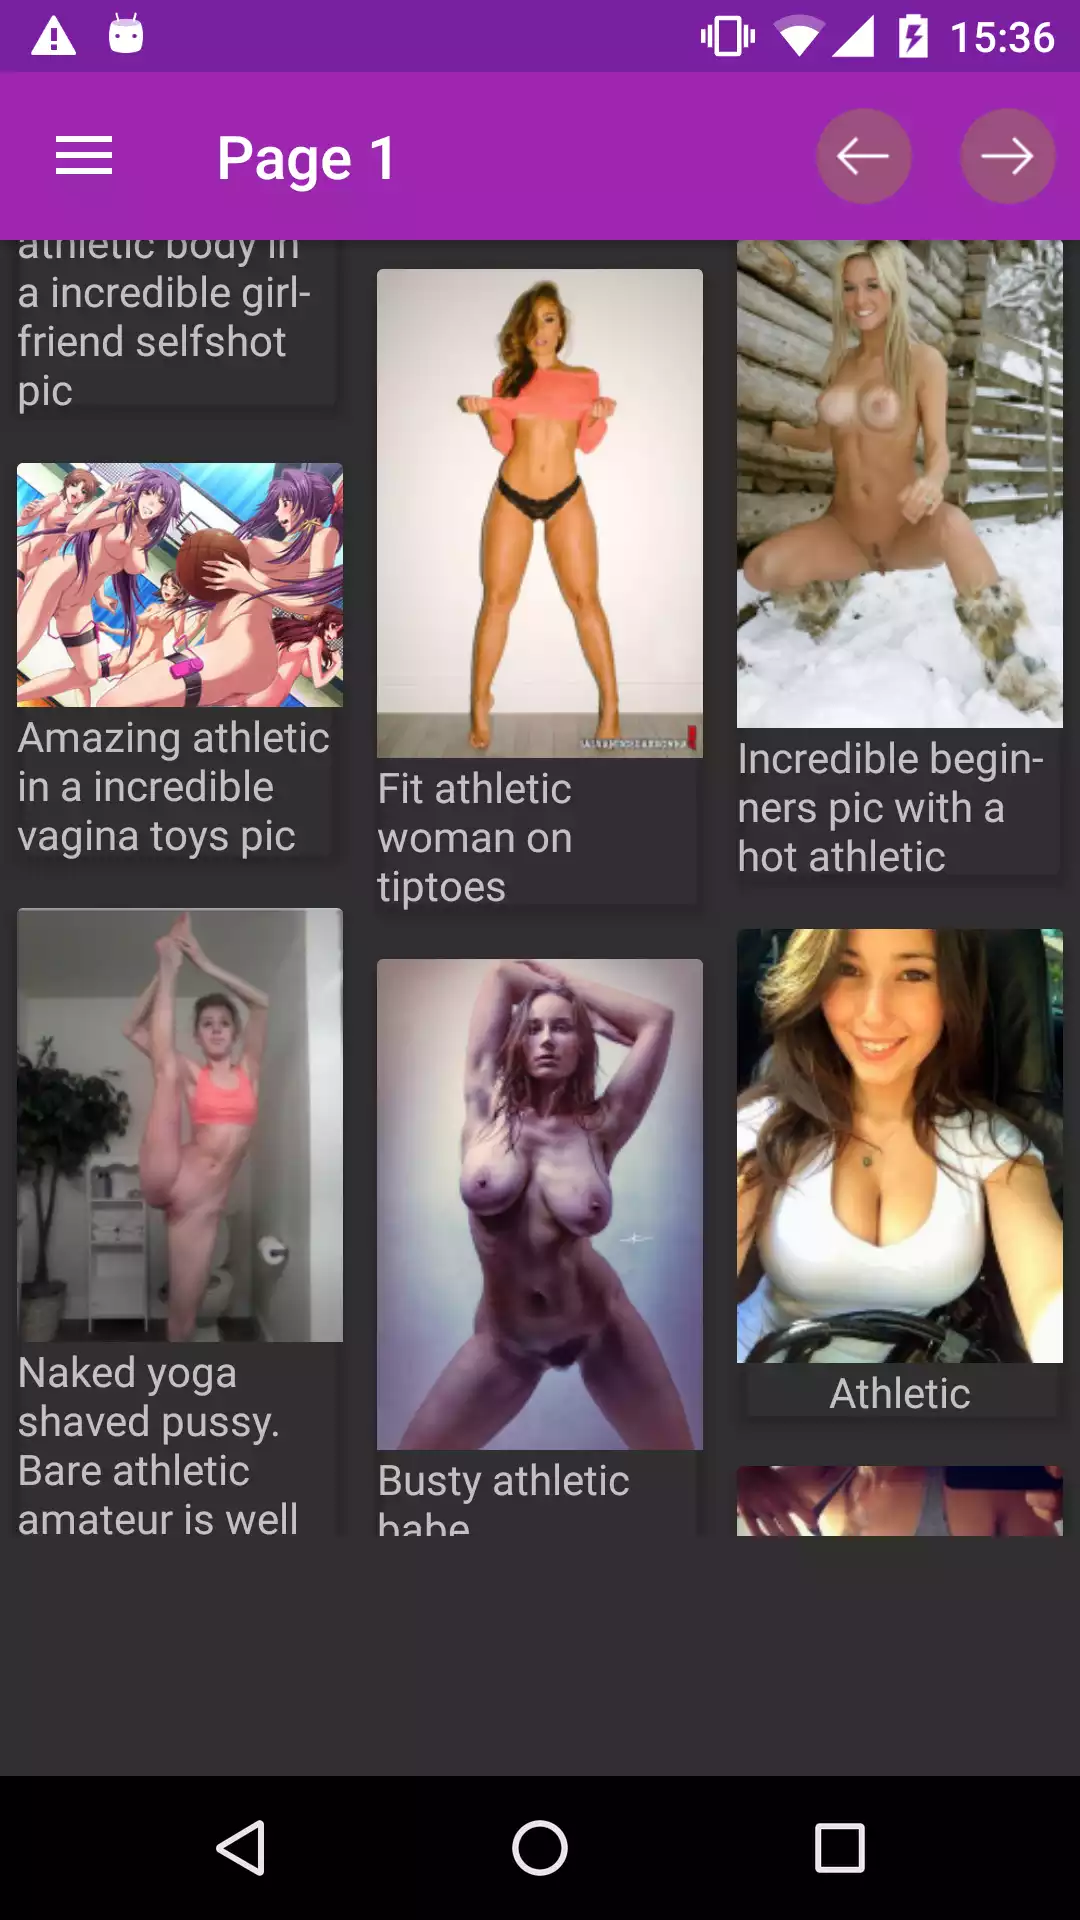 Muscle Pics wallpaper,collection,hentia,sexy,hentai,lisa,dreams,gallery,shrinking,photos,apk,android,anime,femboy,download,hot,porn,apps,for,pics